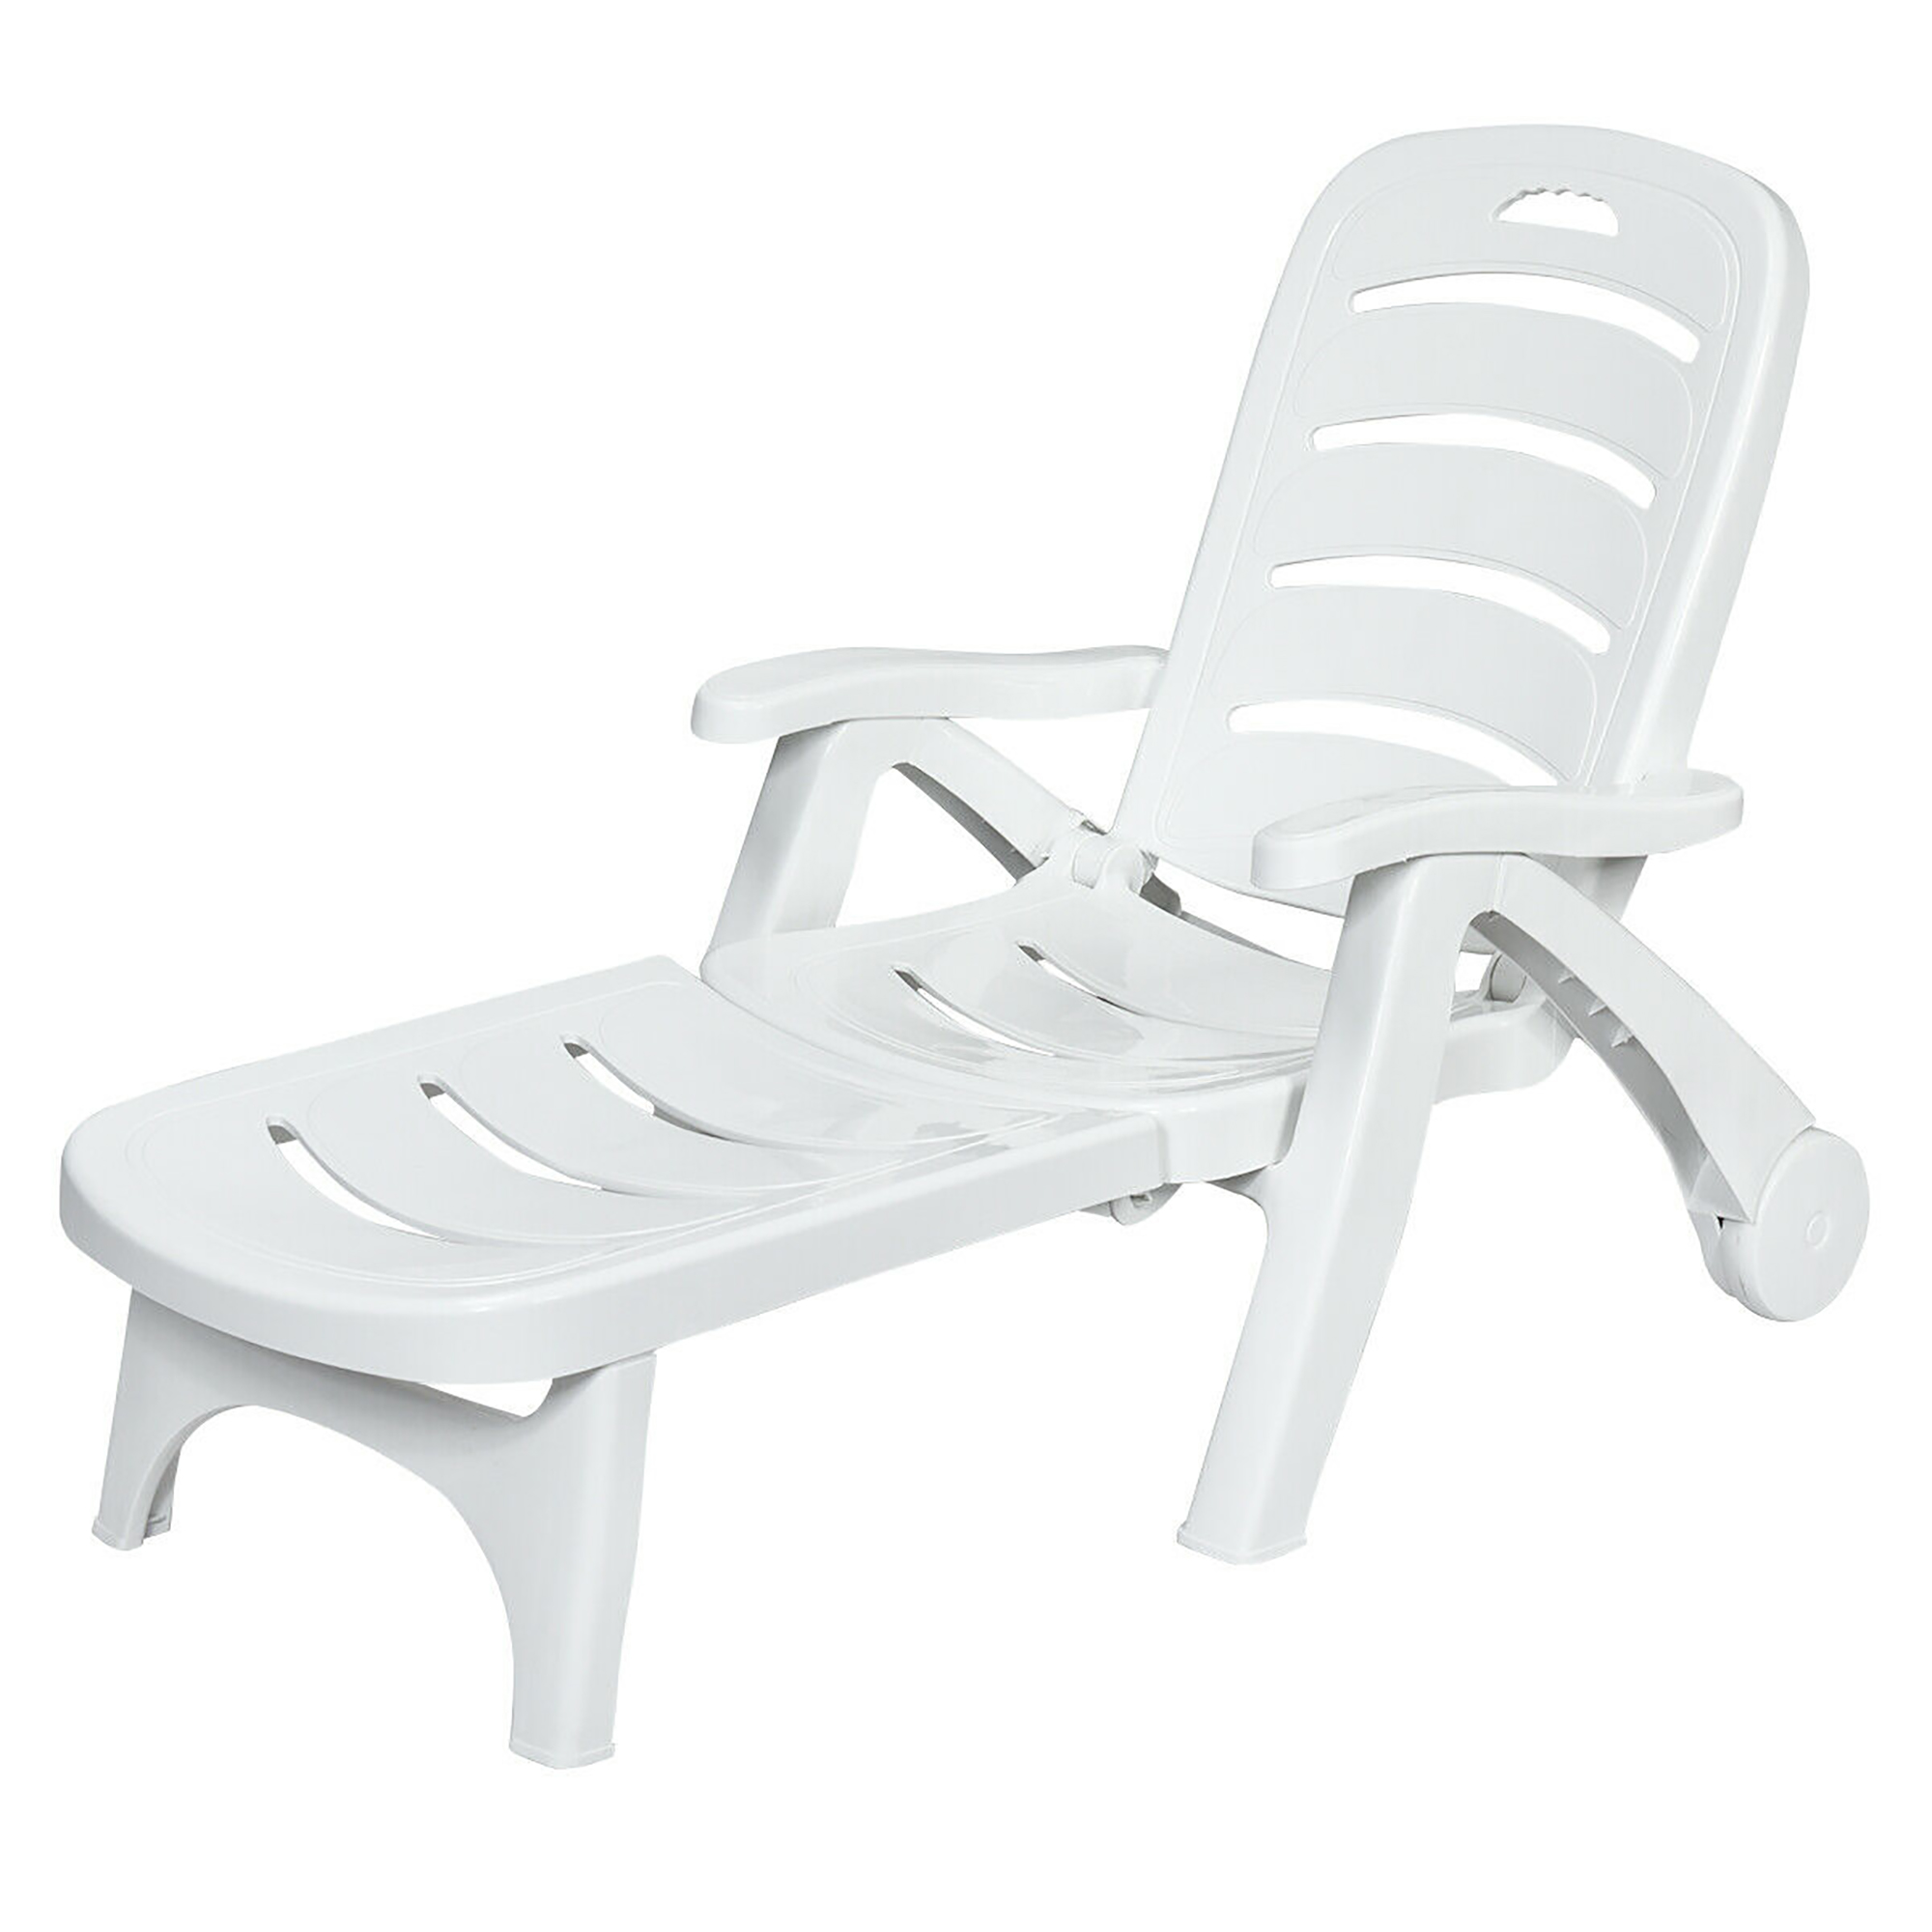 Costway Adjustable Folding Patio Chaise Deck Chair Lounger 5 Position Recliner w/ Wheels - image 1 of 10